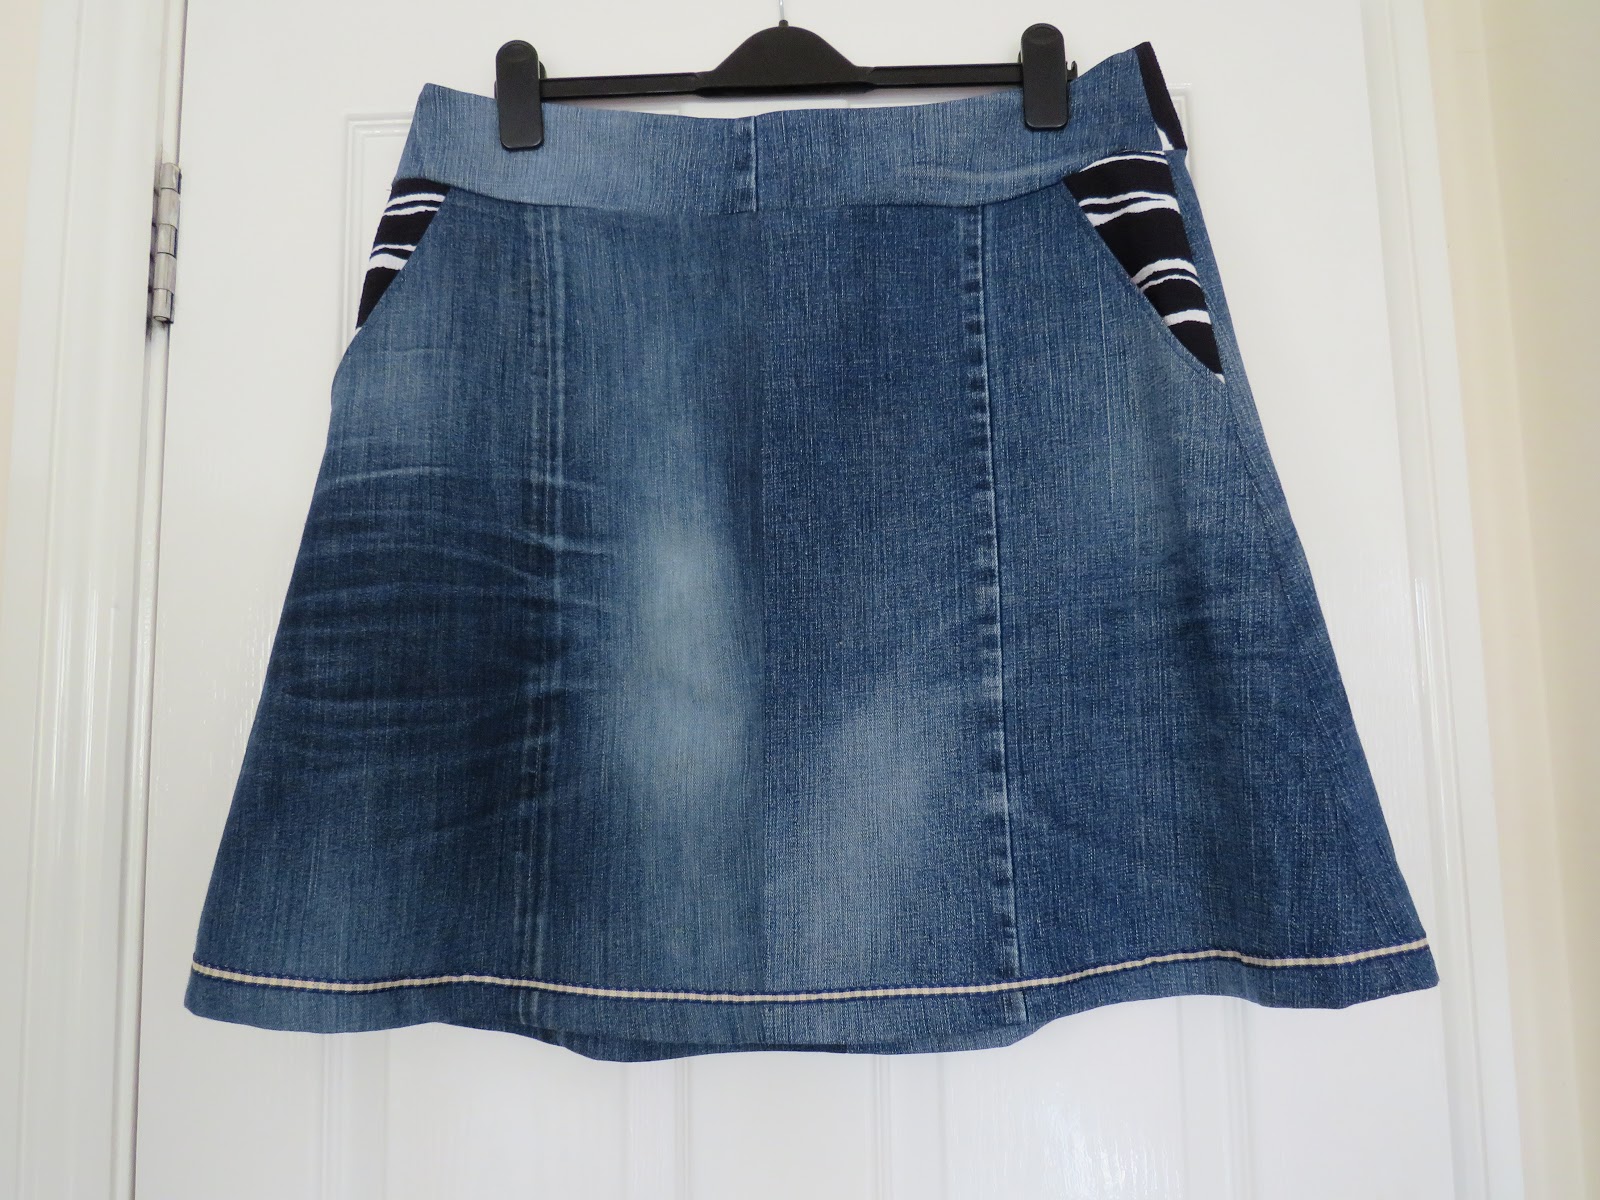 Refashion Co-op: Jeans to skirt refashion